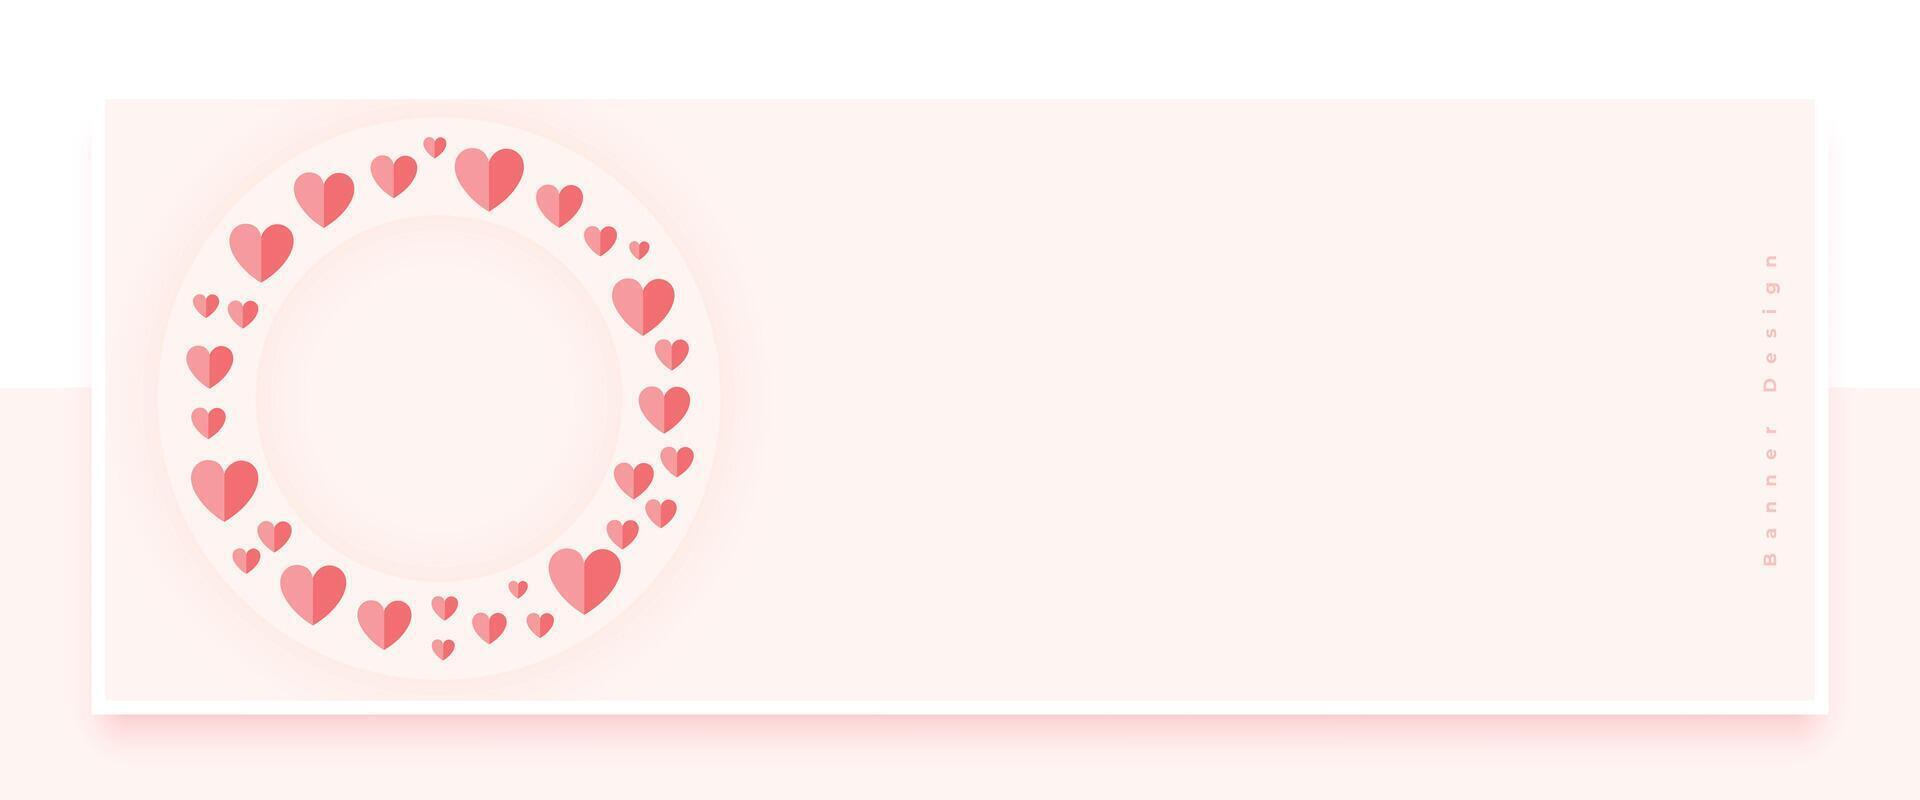 paper style love heart frame romantic banner with text space vector